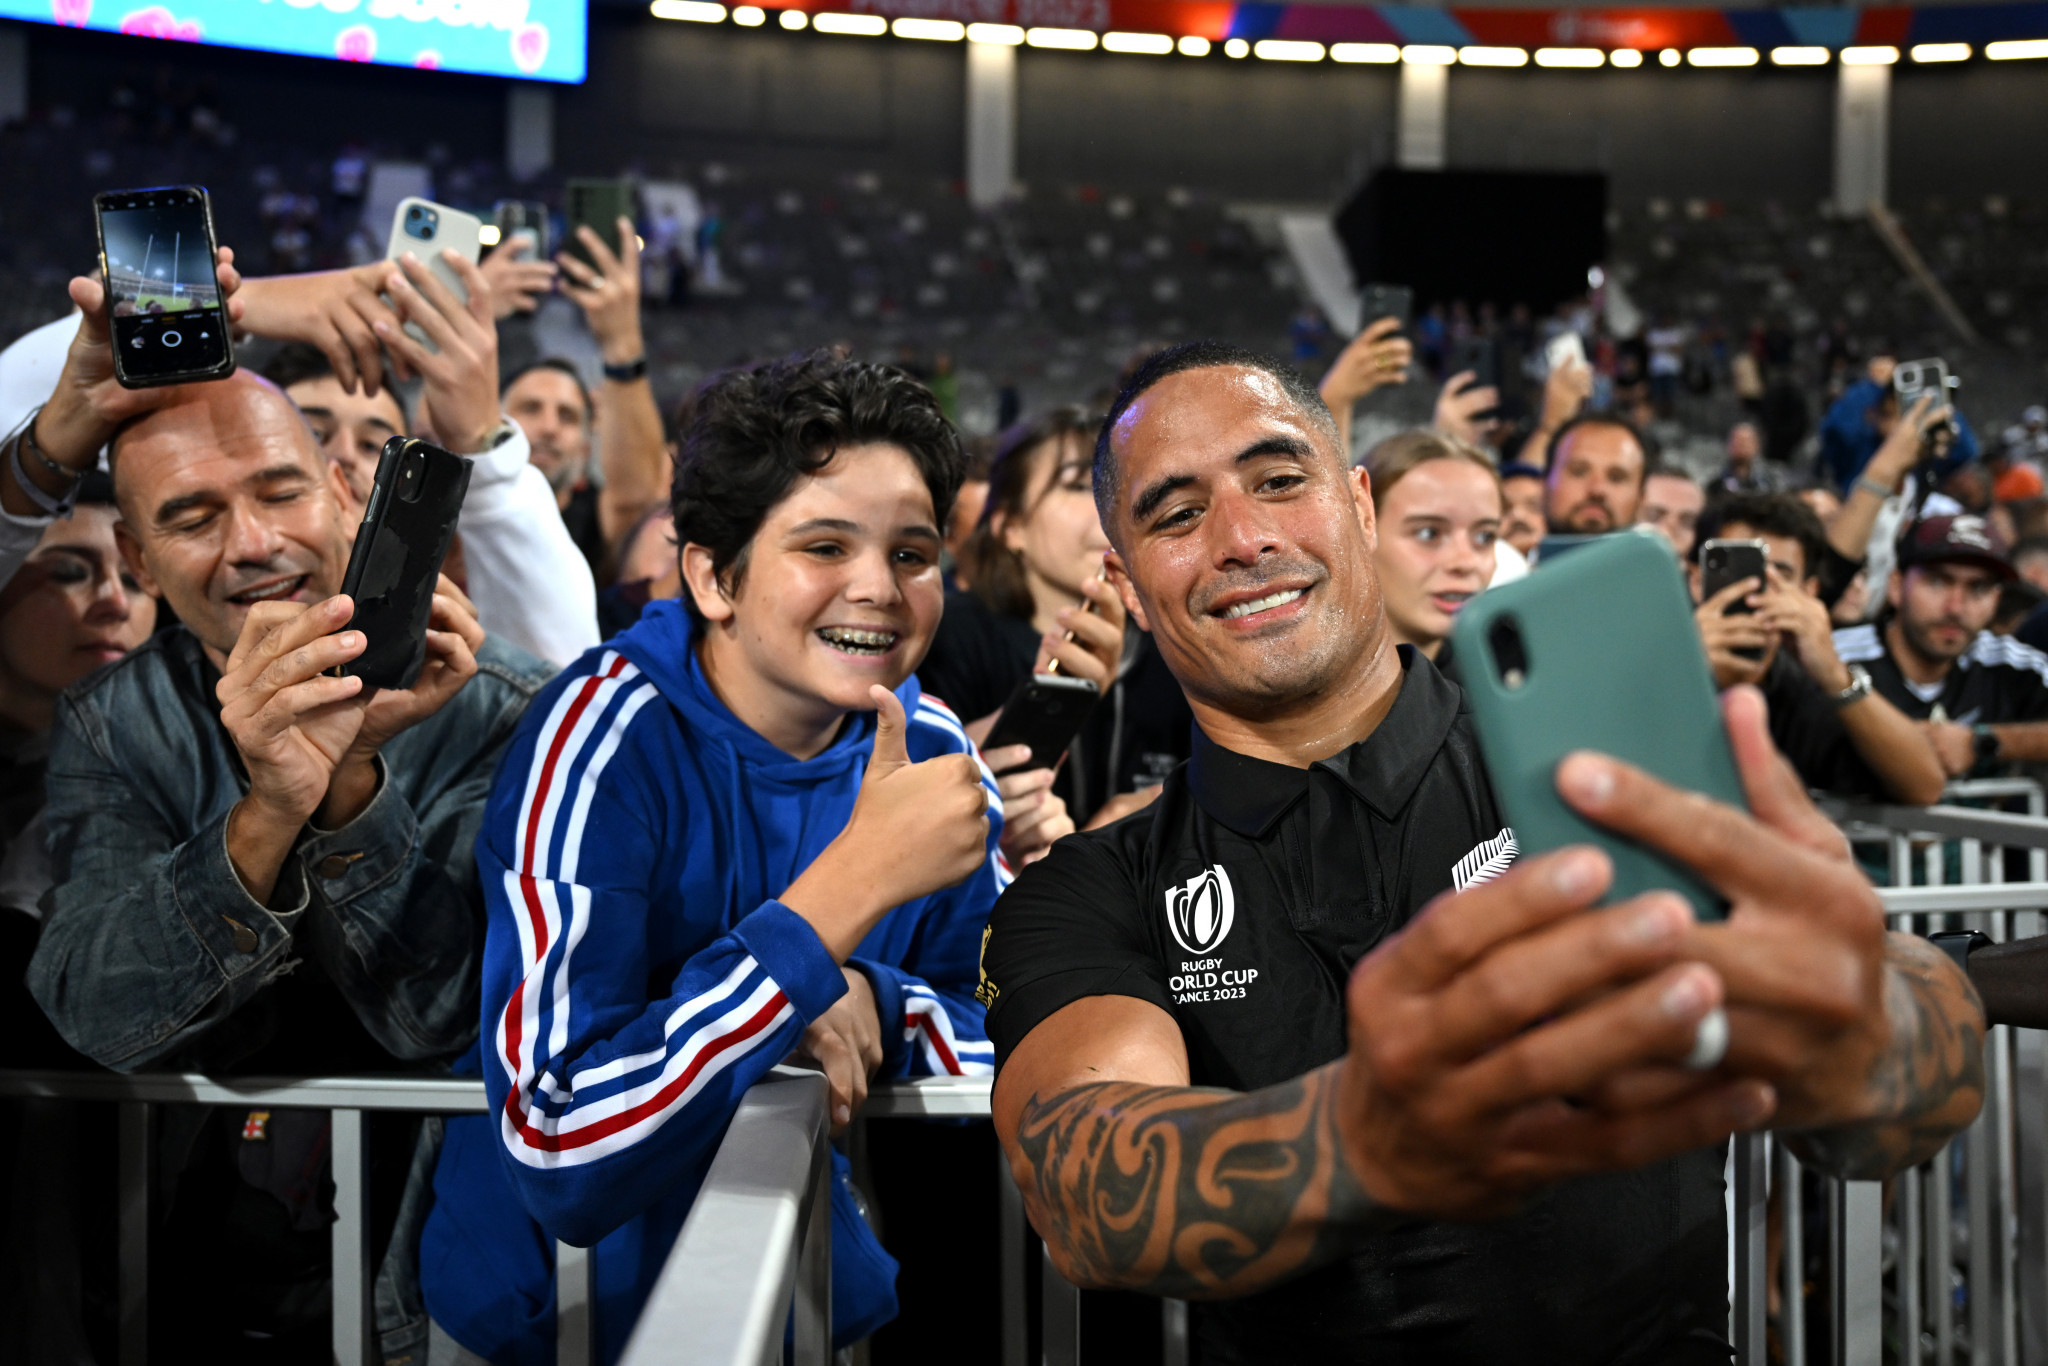 Aaron Smith of New Zealand celebrates with a selfie following the resounding win ©Getty Images